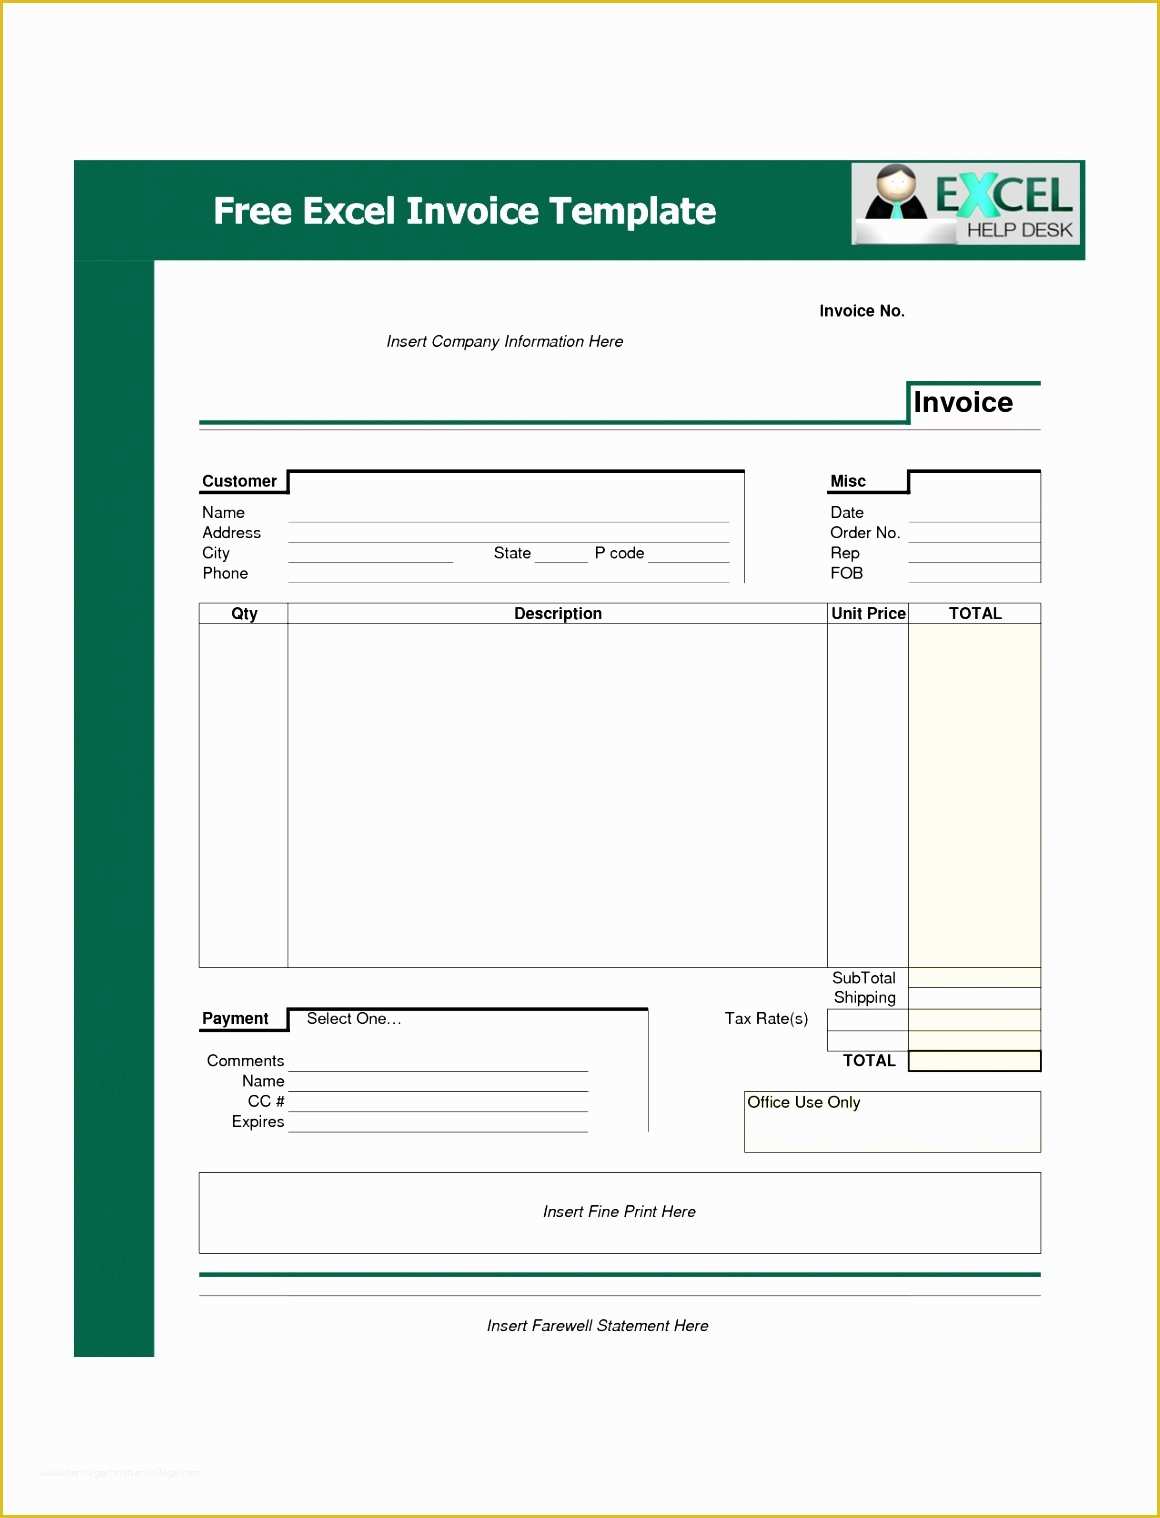 Database Templates Free Download Of 10 Excel Database Templates Free Download Exceltemplates